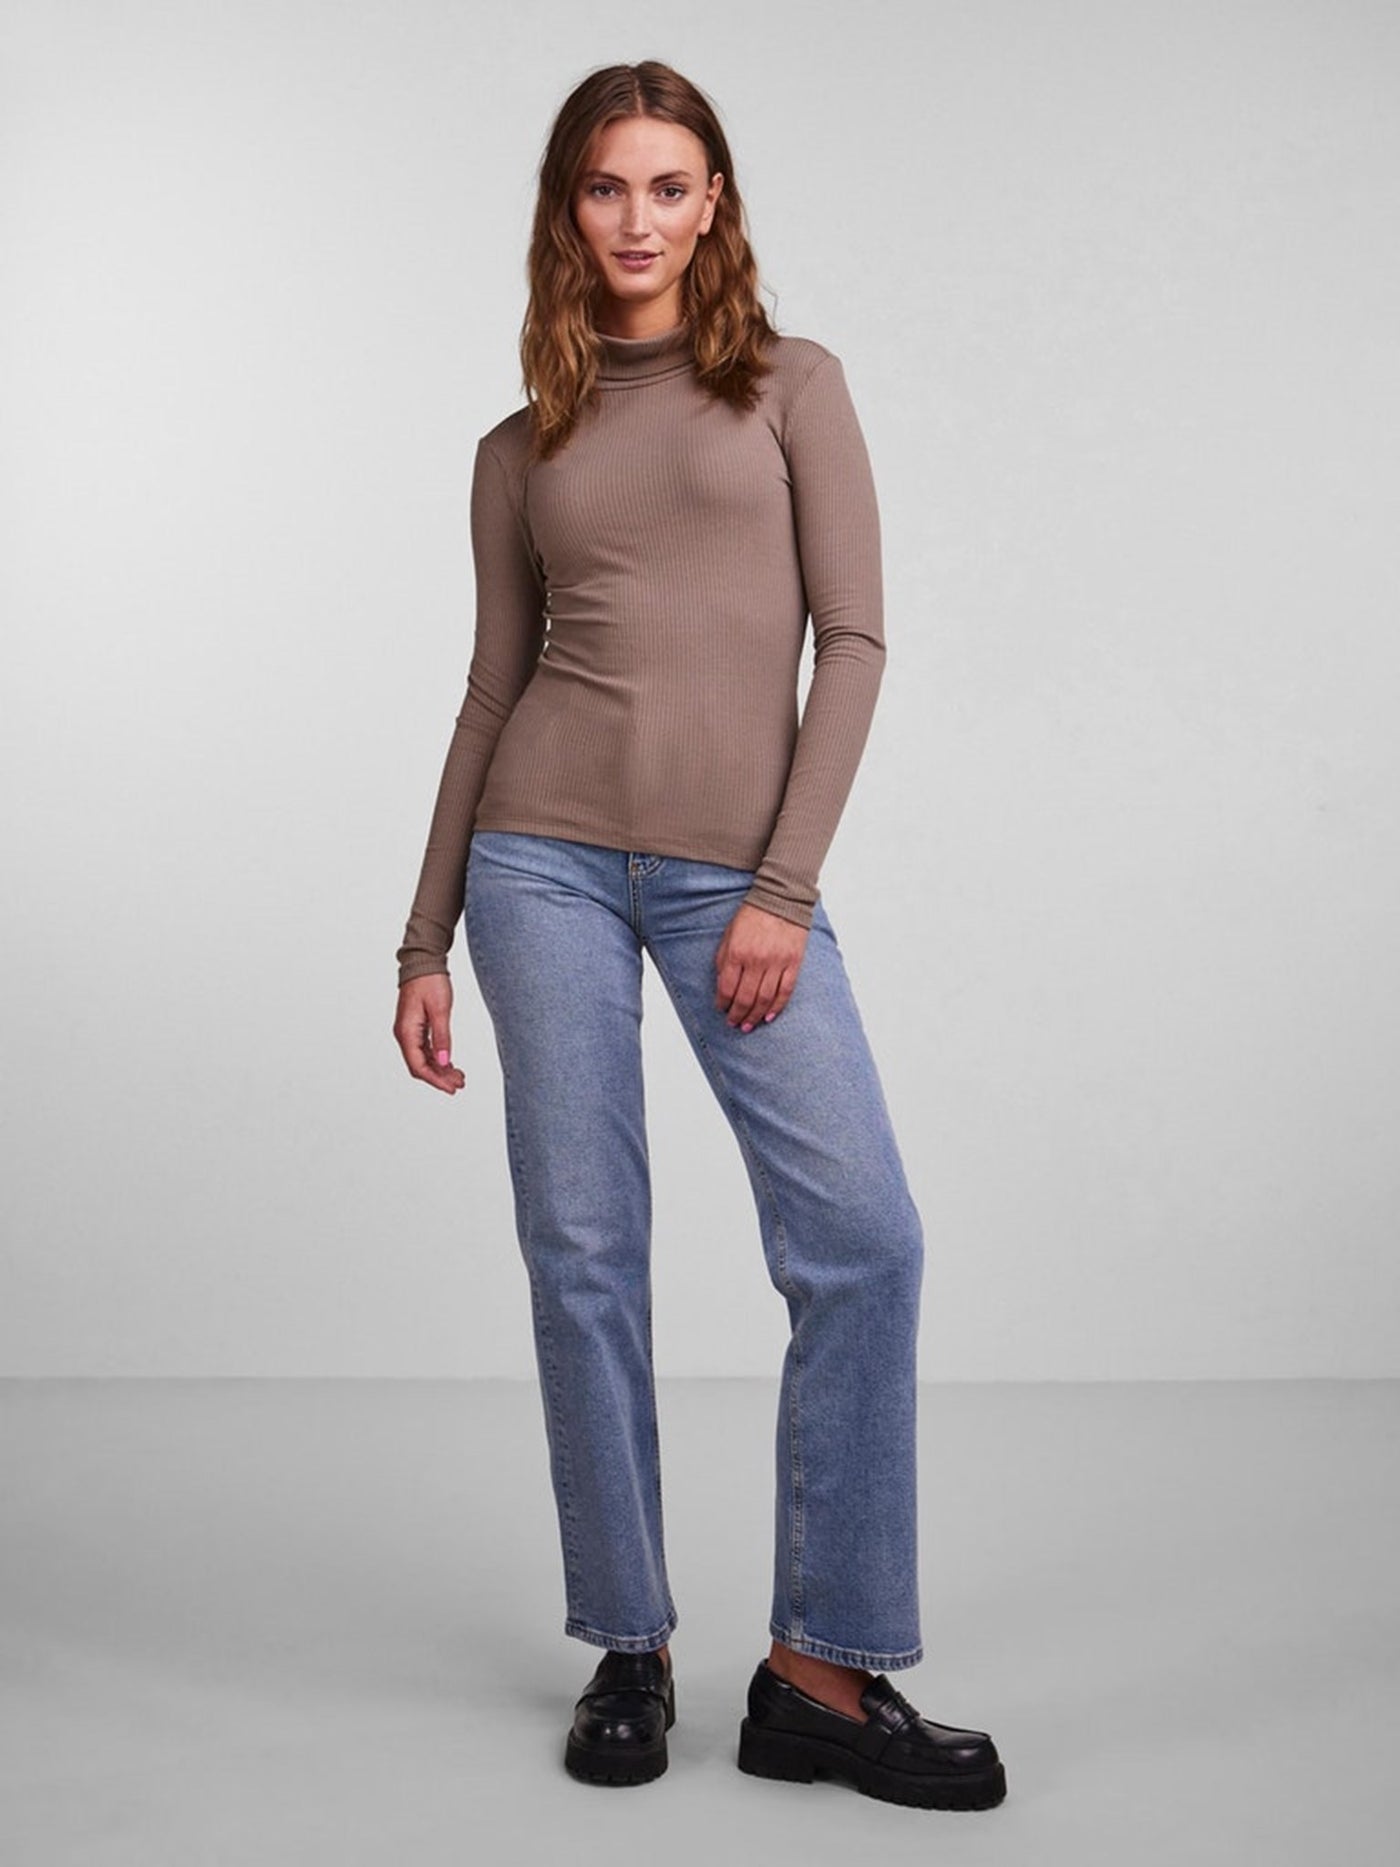 Kitte Rollneck Top - Fossil - PIECES 3